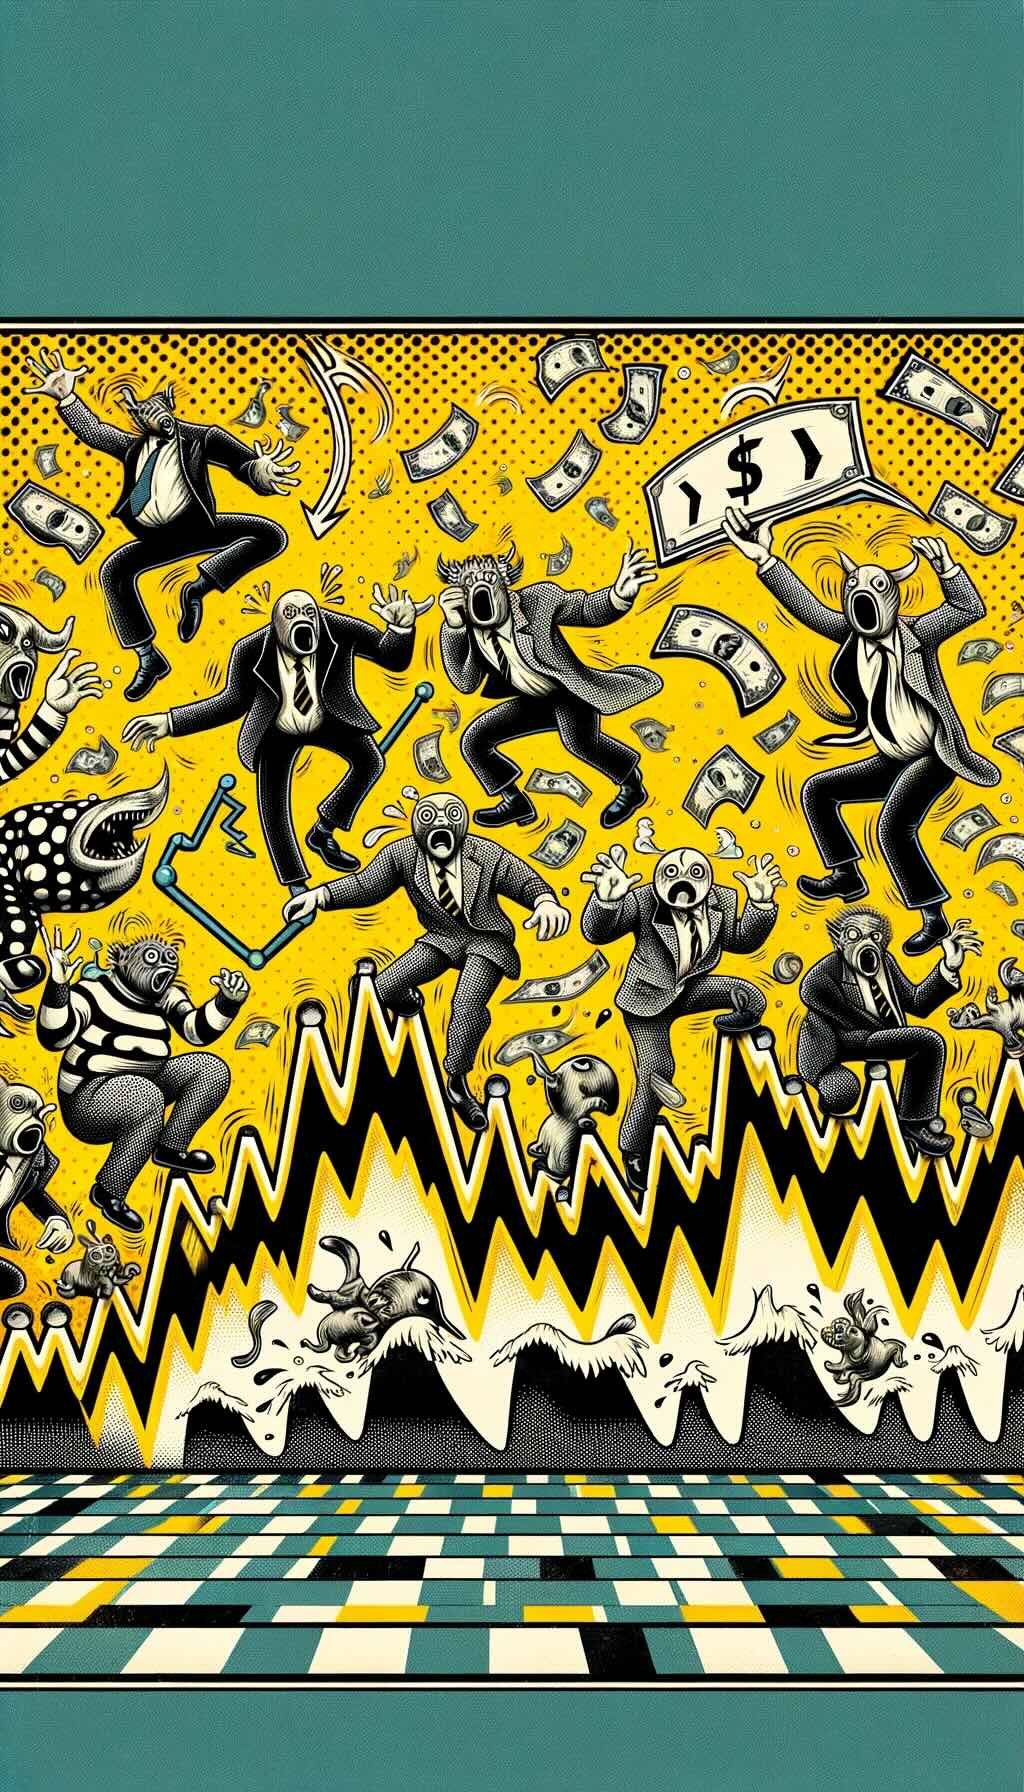 Concept of 'smoothing out volatility' capturing the chaotic essence of the financial world with a playful touch.